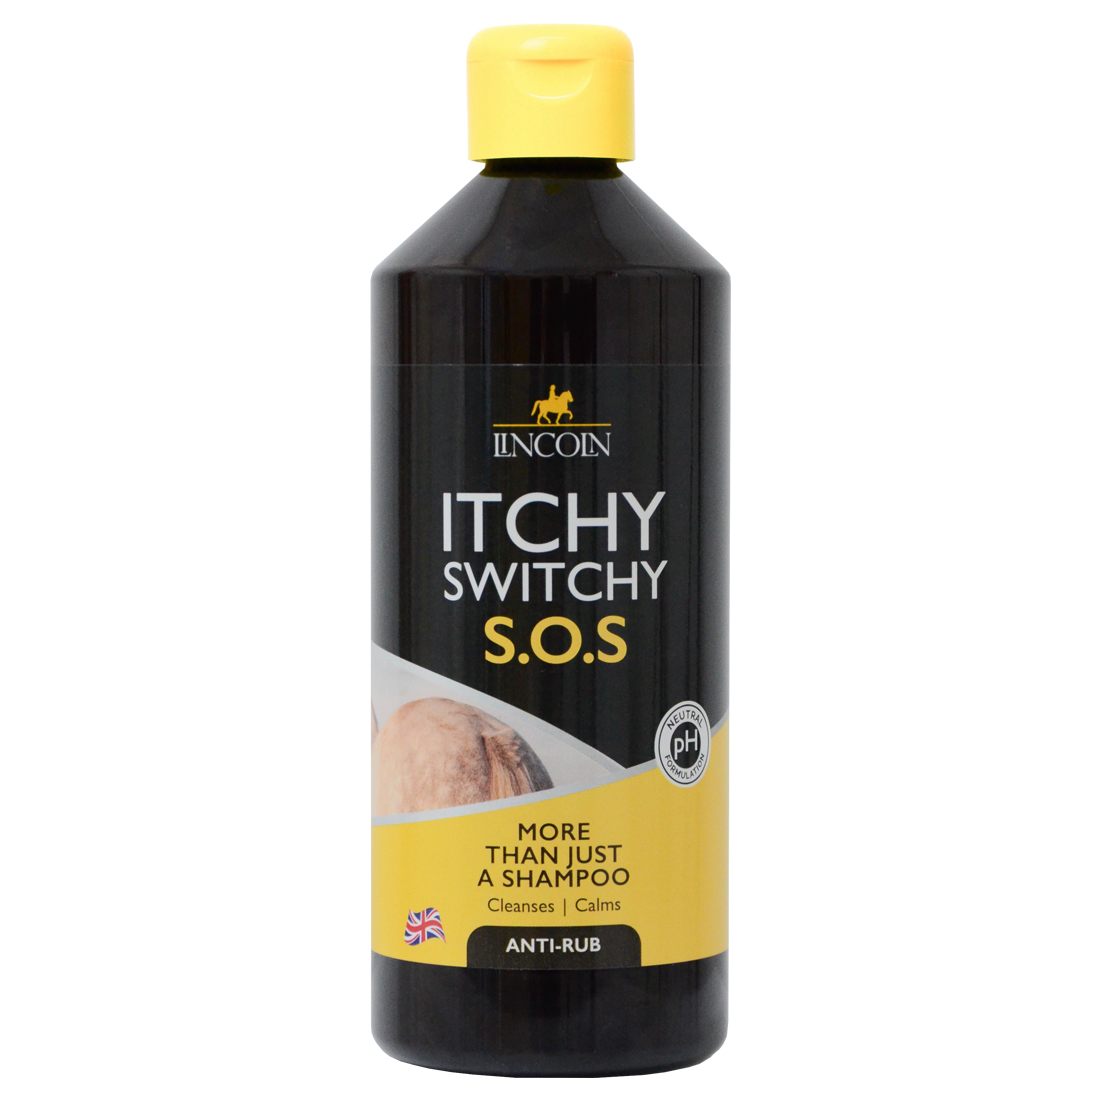 Lincoln Itchy Switchy SOS Shampoo